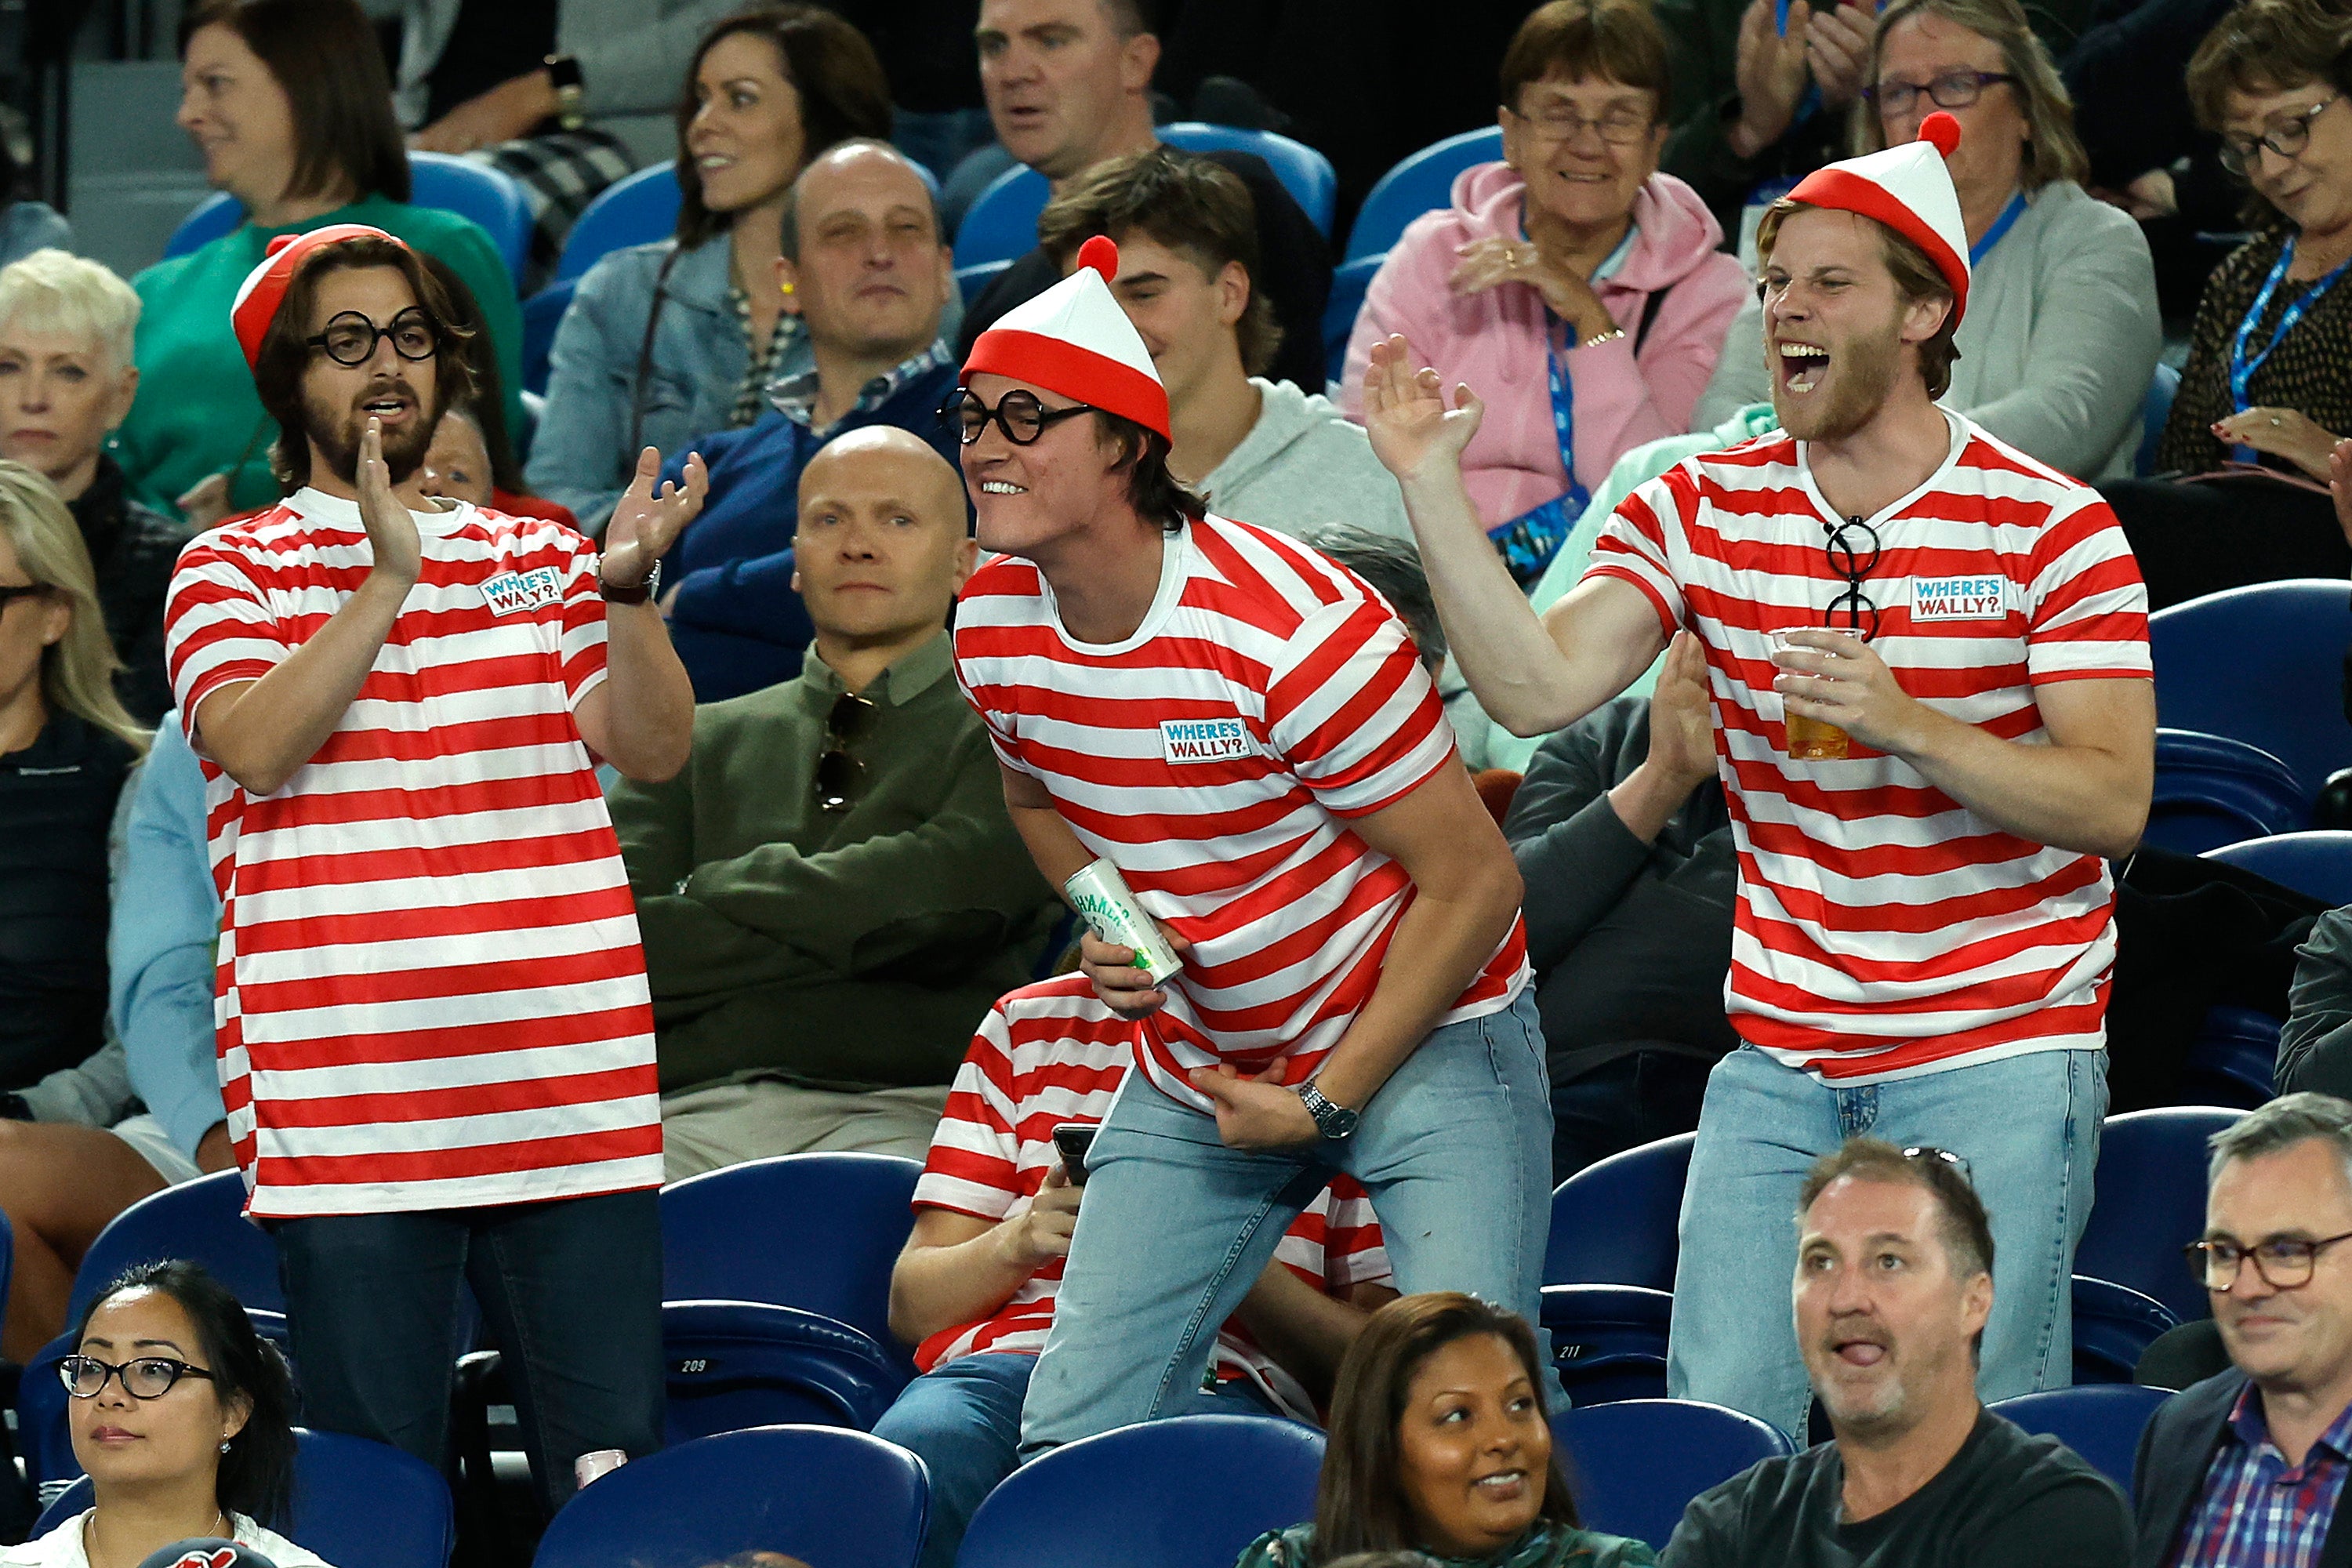 Fans in the crowd dressed up in ‘Where’s Wally?’ costumes wind up Novak Djokovic